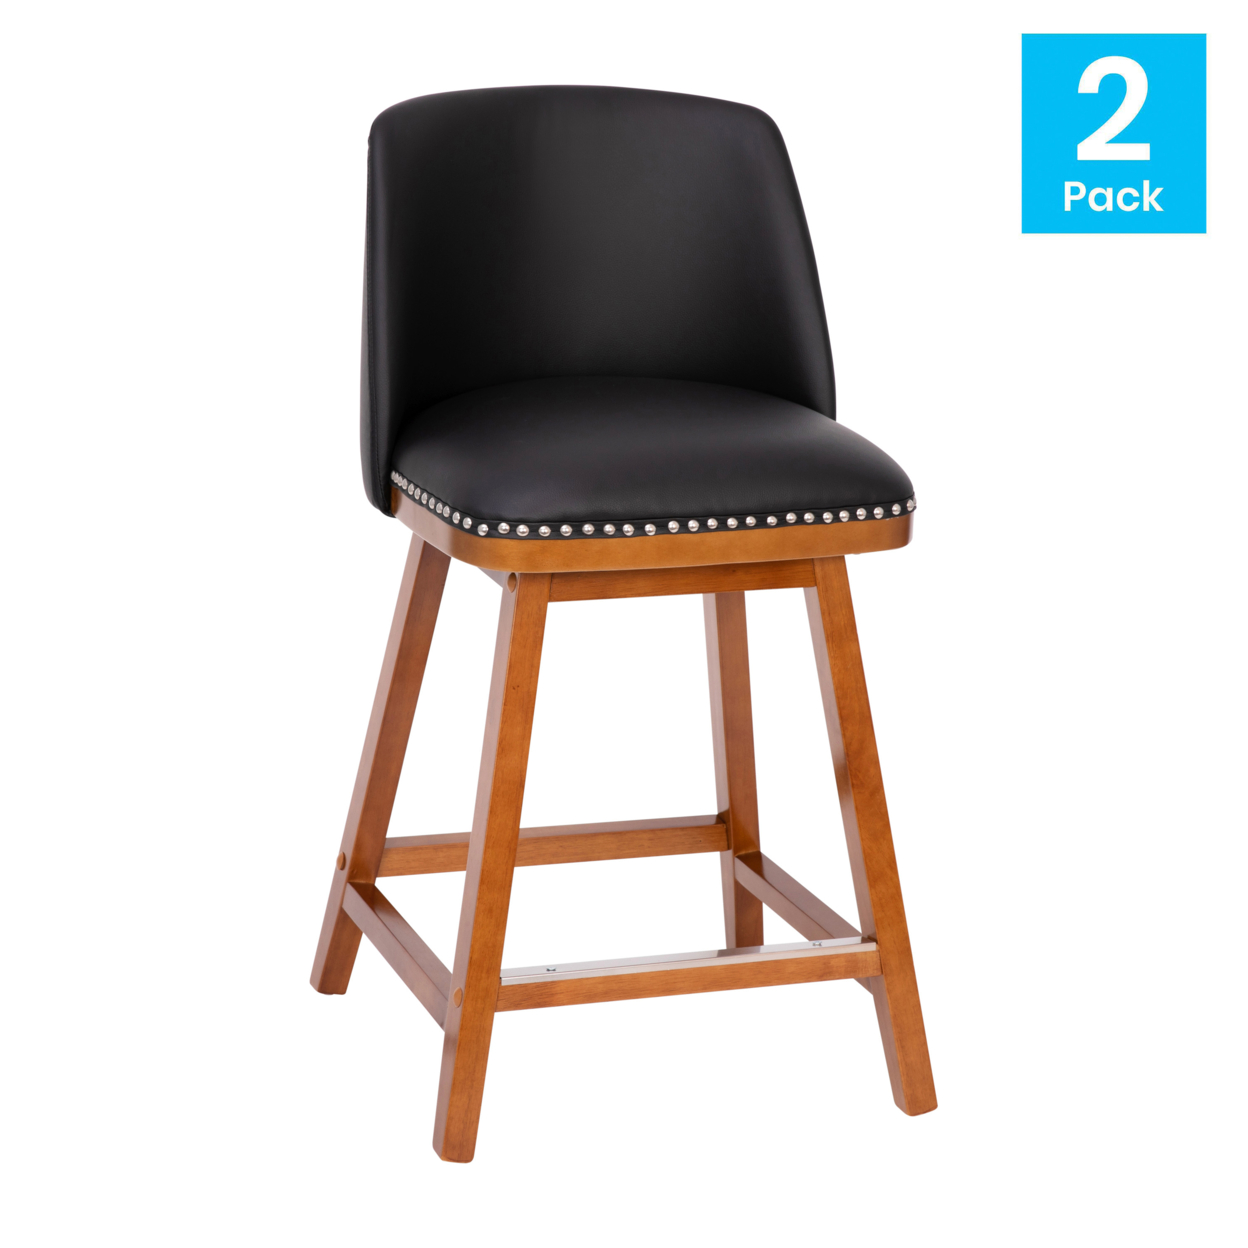 2 Piece 24 Inch Leather Stools, Curved Back, Seat, Nailhead Trims, Black